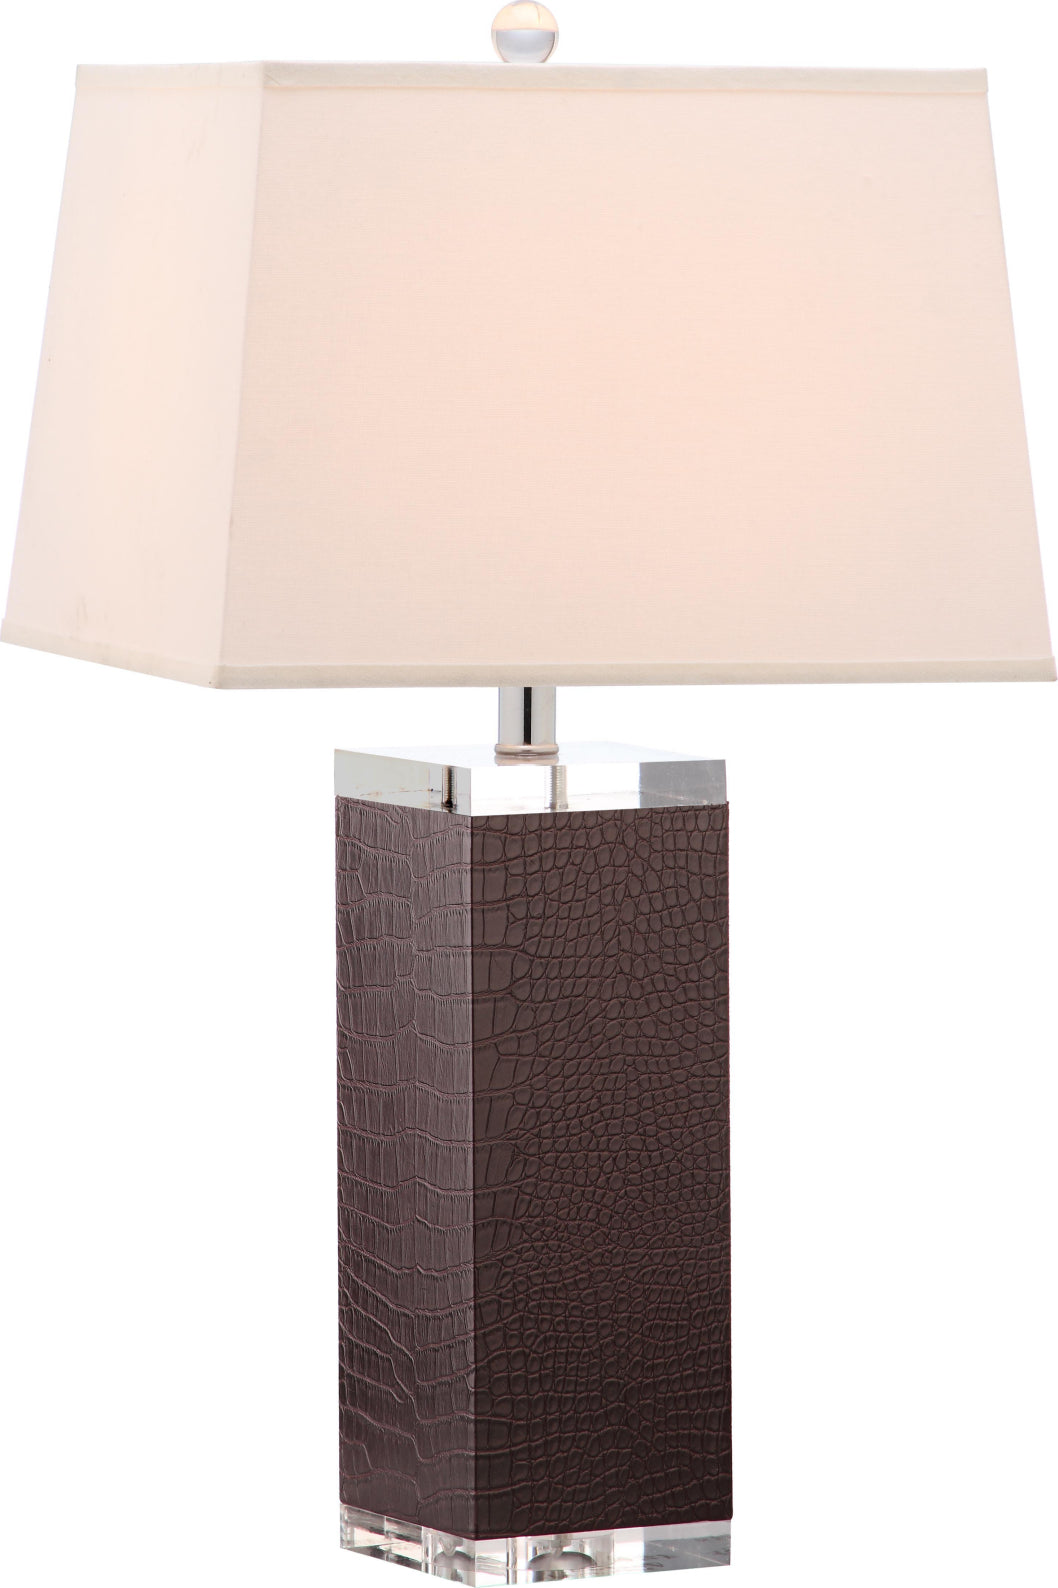 Safavieh Deco 27-Inch H Leather Table Lamp Brown Mirror main image